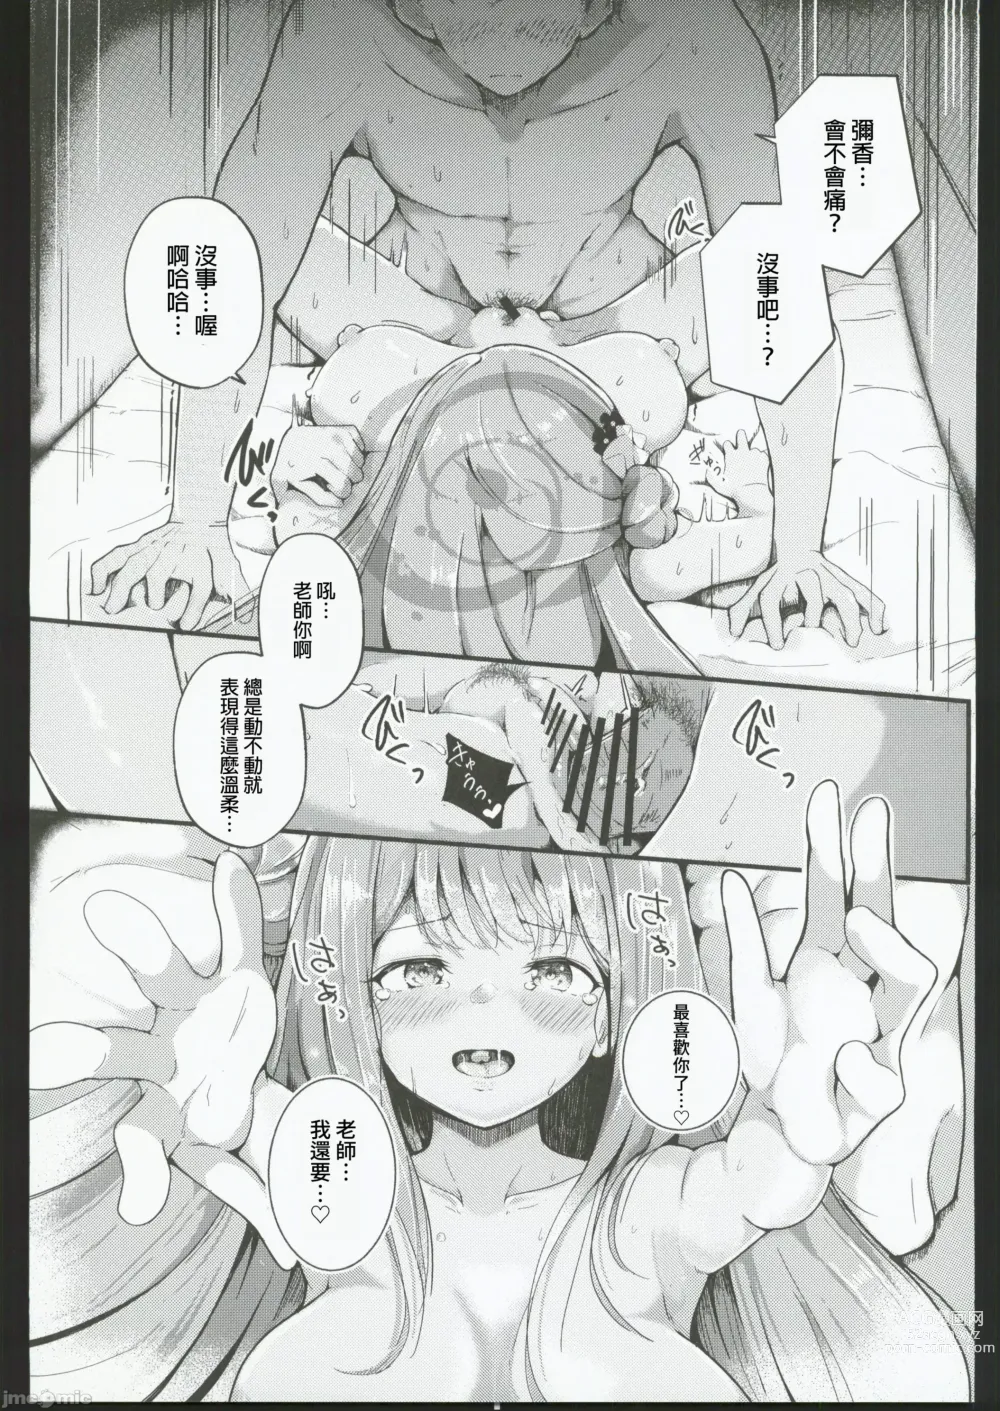 Page 20 of doujinshi Blanc Aile to Otogibanashi - The treaty lost, but hope remains.